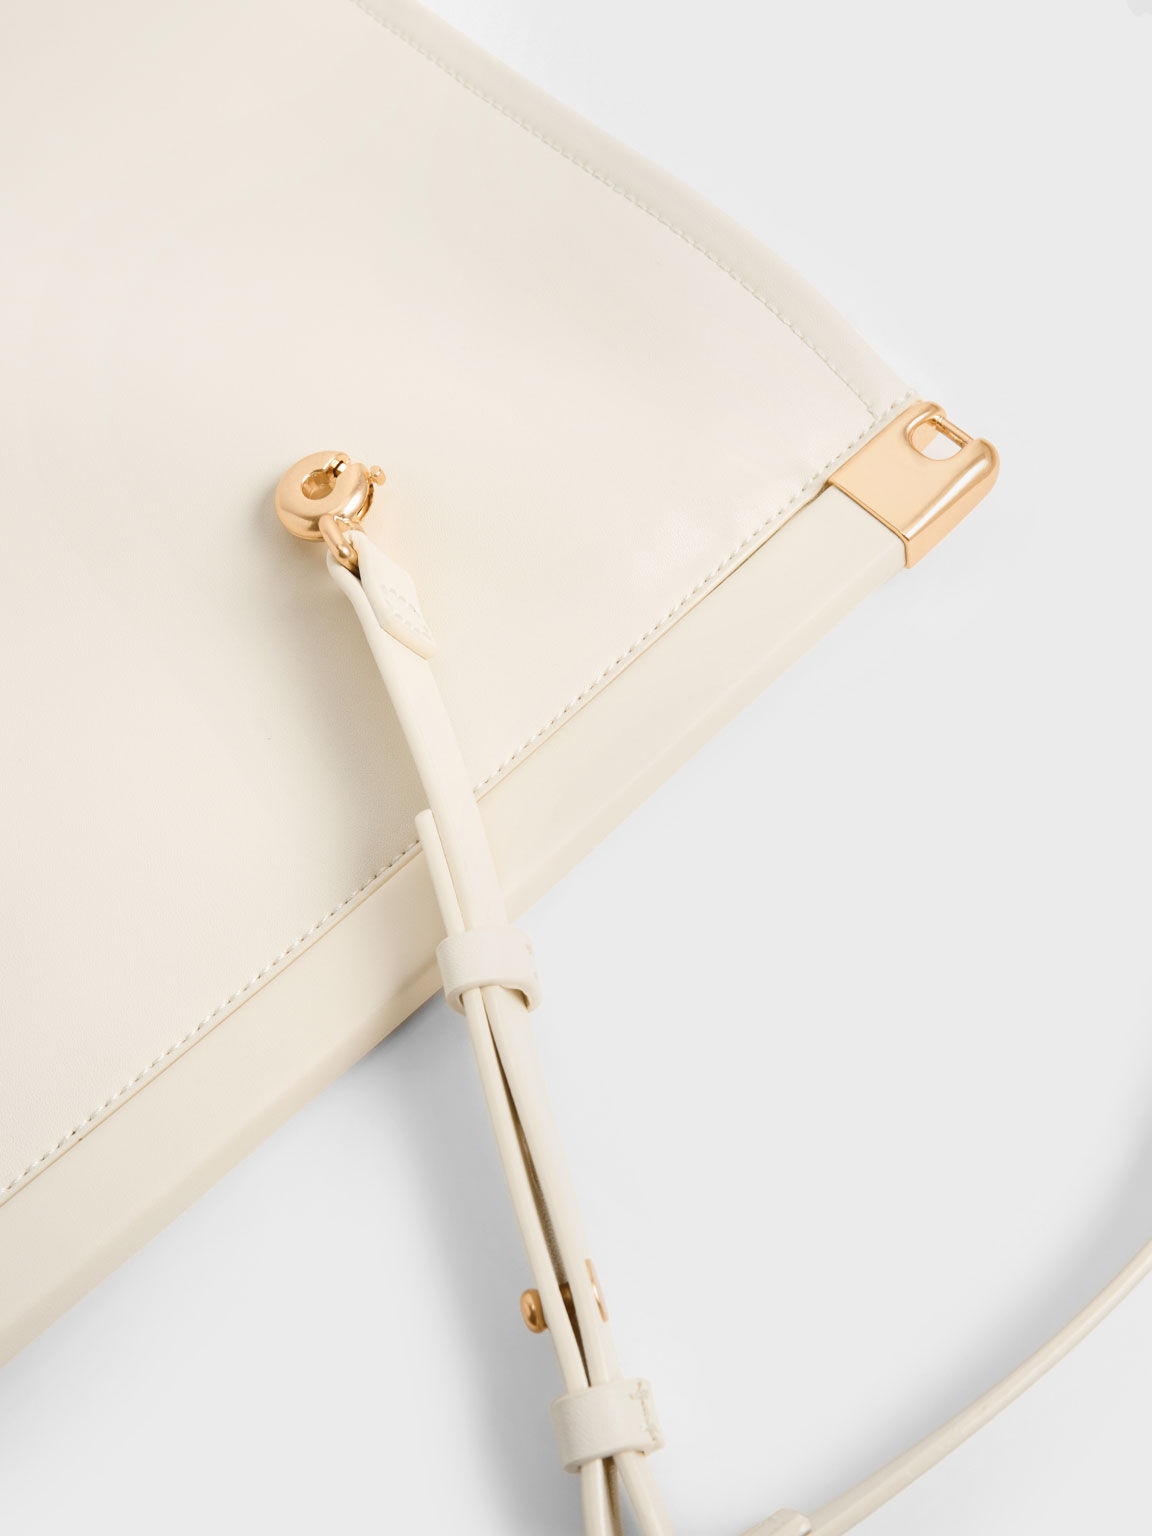 Ridley Slouchy Tote Bag, Cream, hi-res